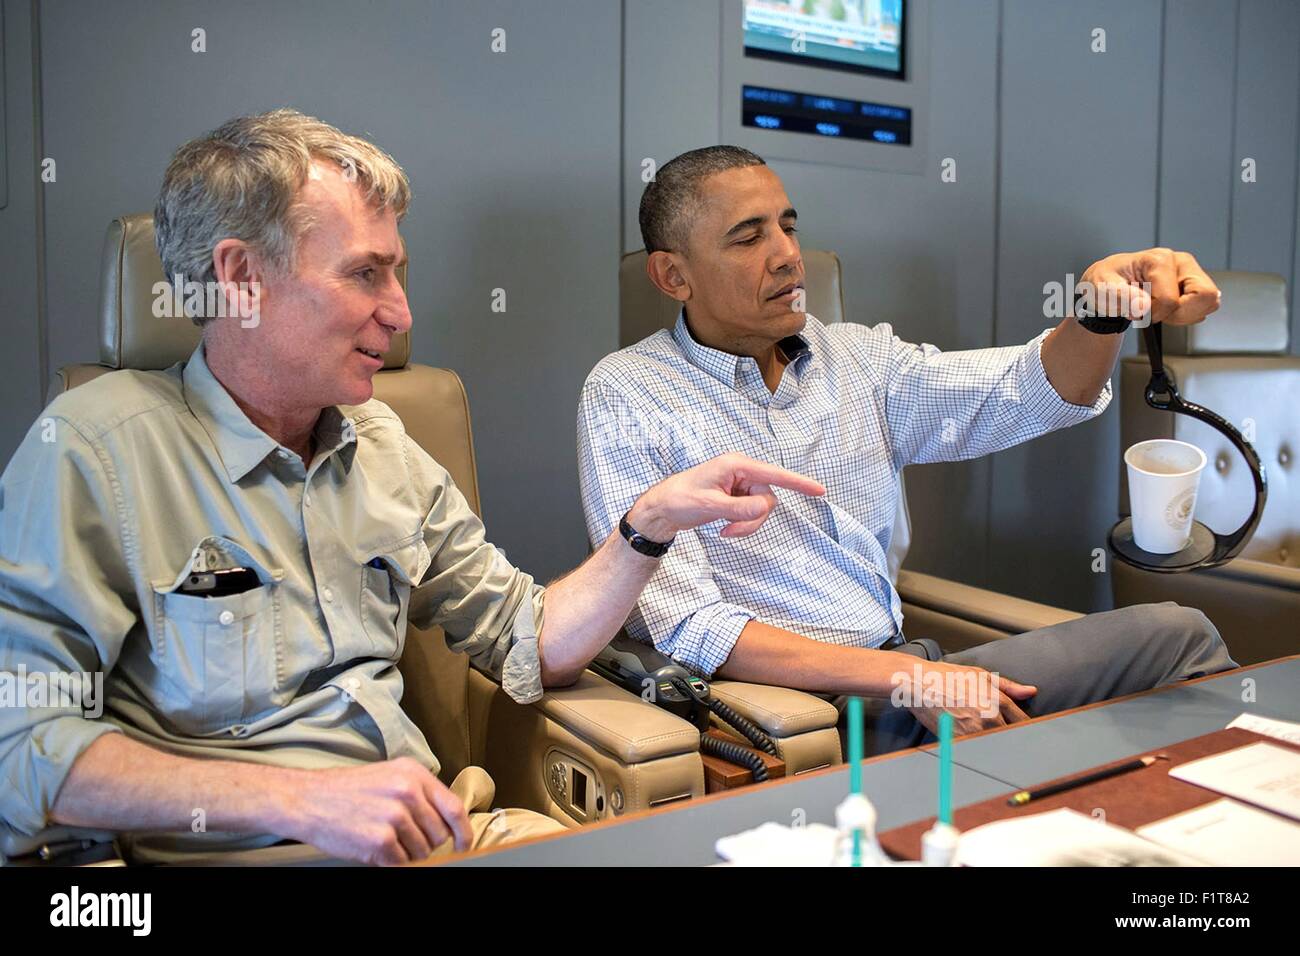 U.S. President Barack Obama talks with Bill Nye, the Science Guy, aboard Air Force One en route to Miami April 22, 2015. Stock Photo